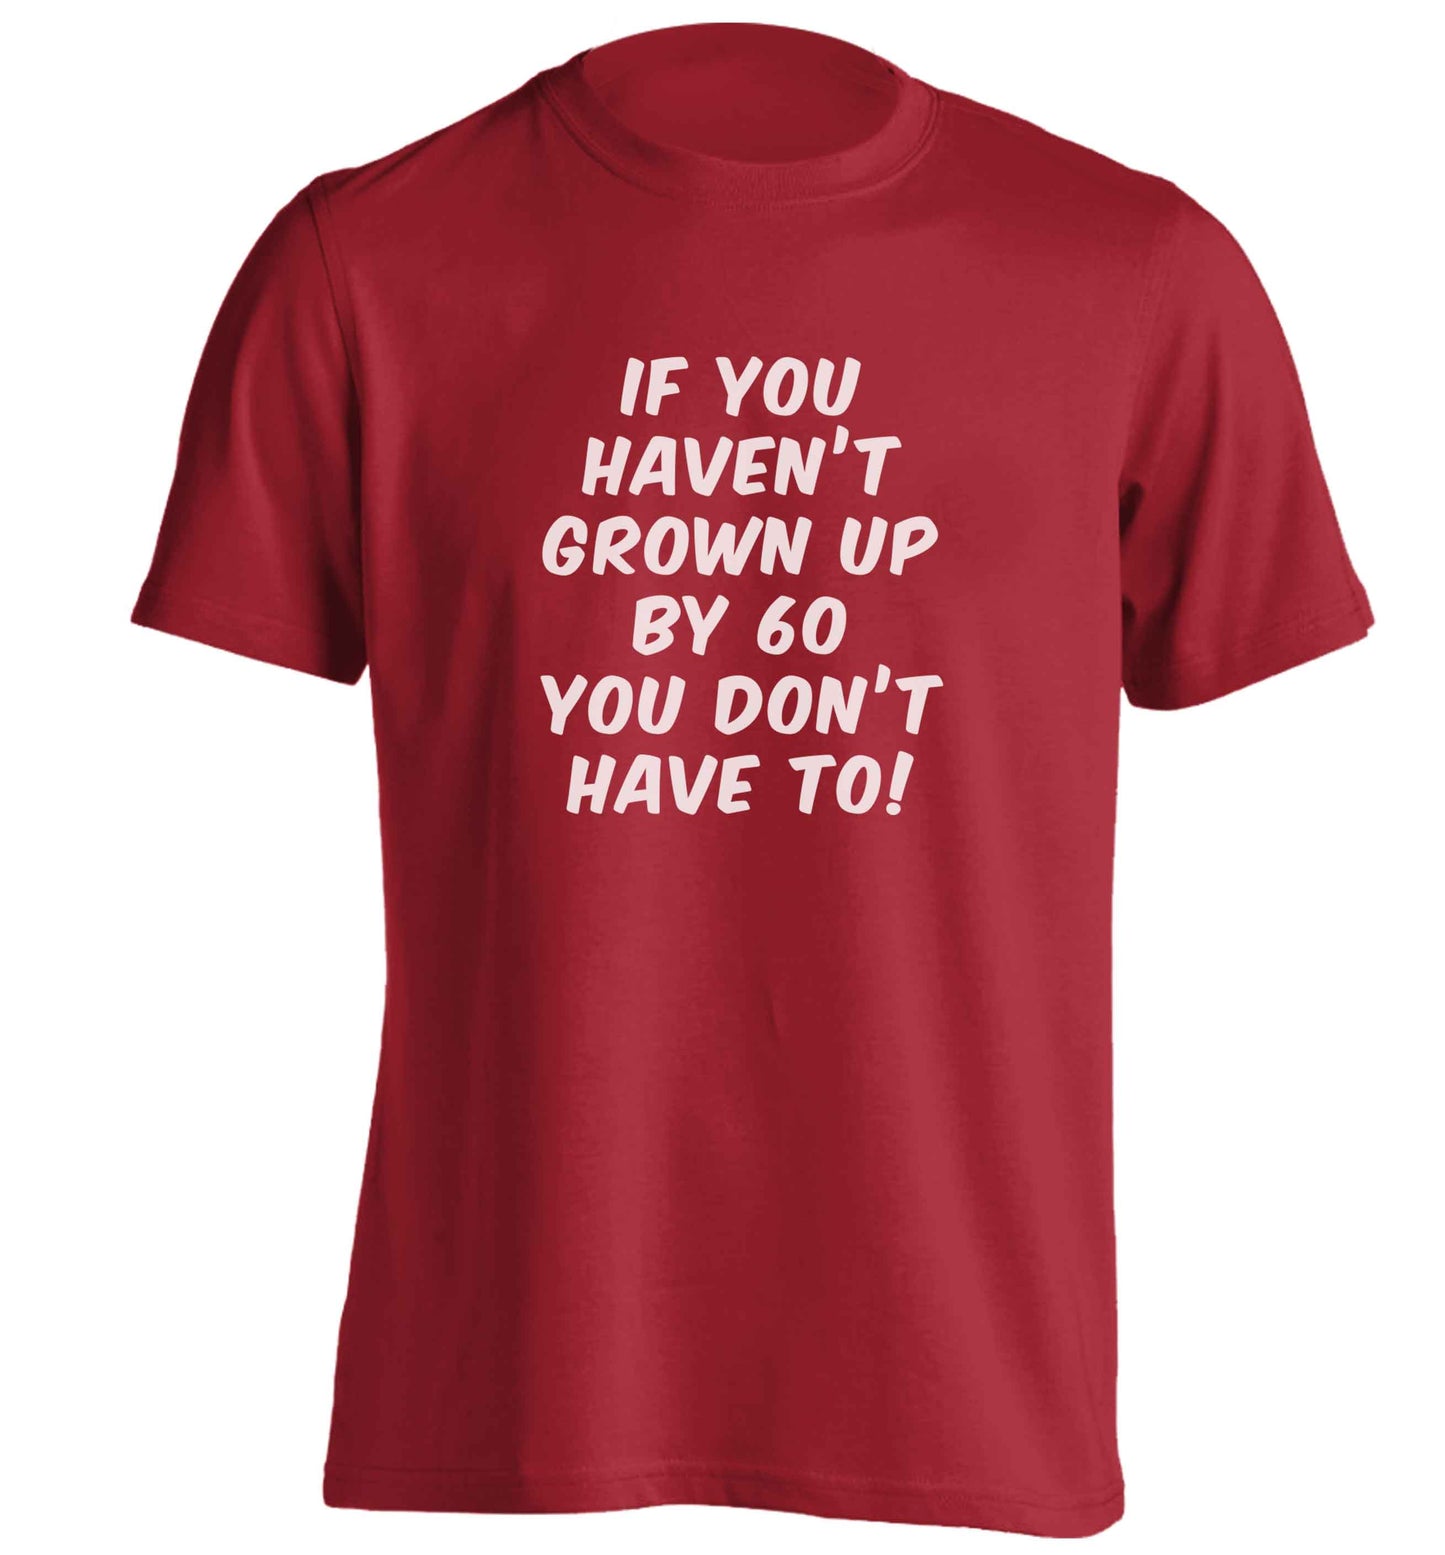 If you haven't grown up by sixty you don't have to adults unisex red Tshirt 2XL